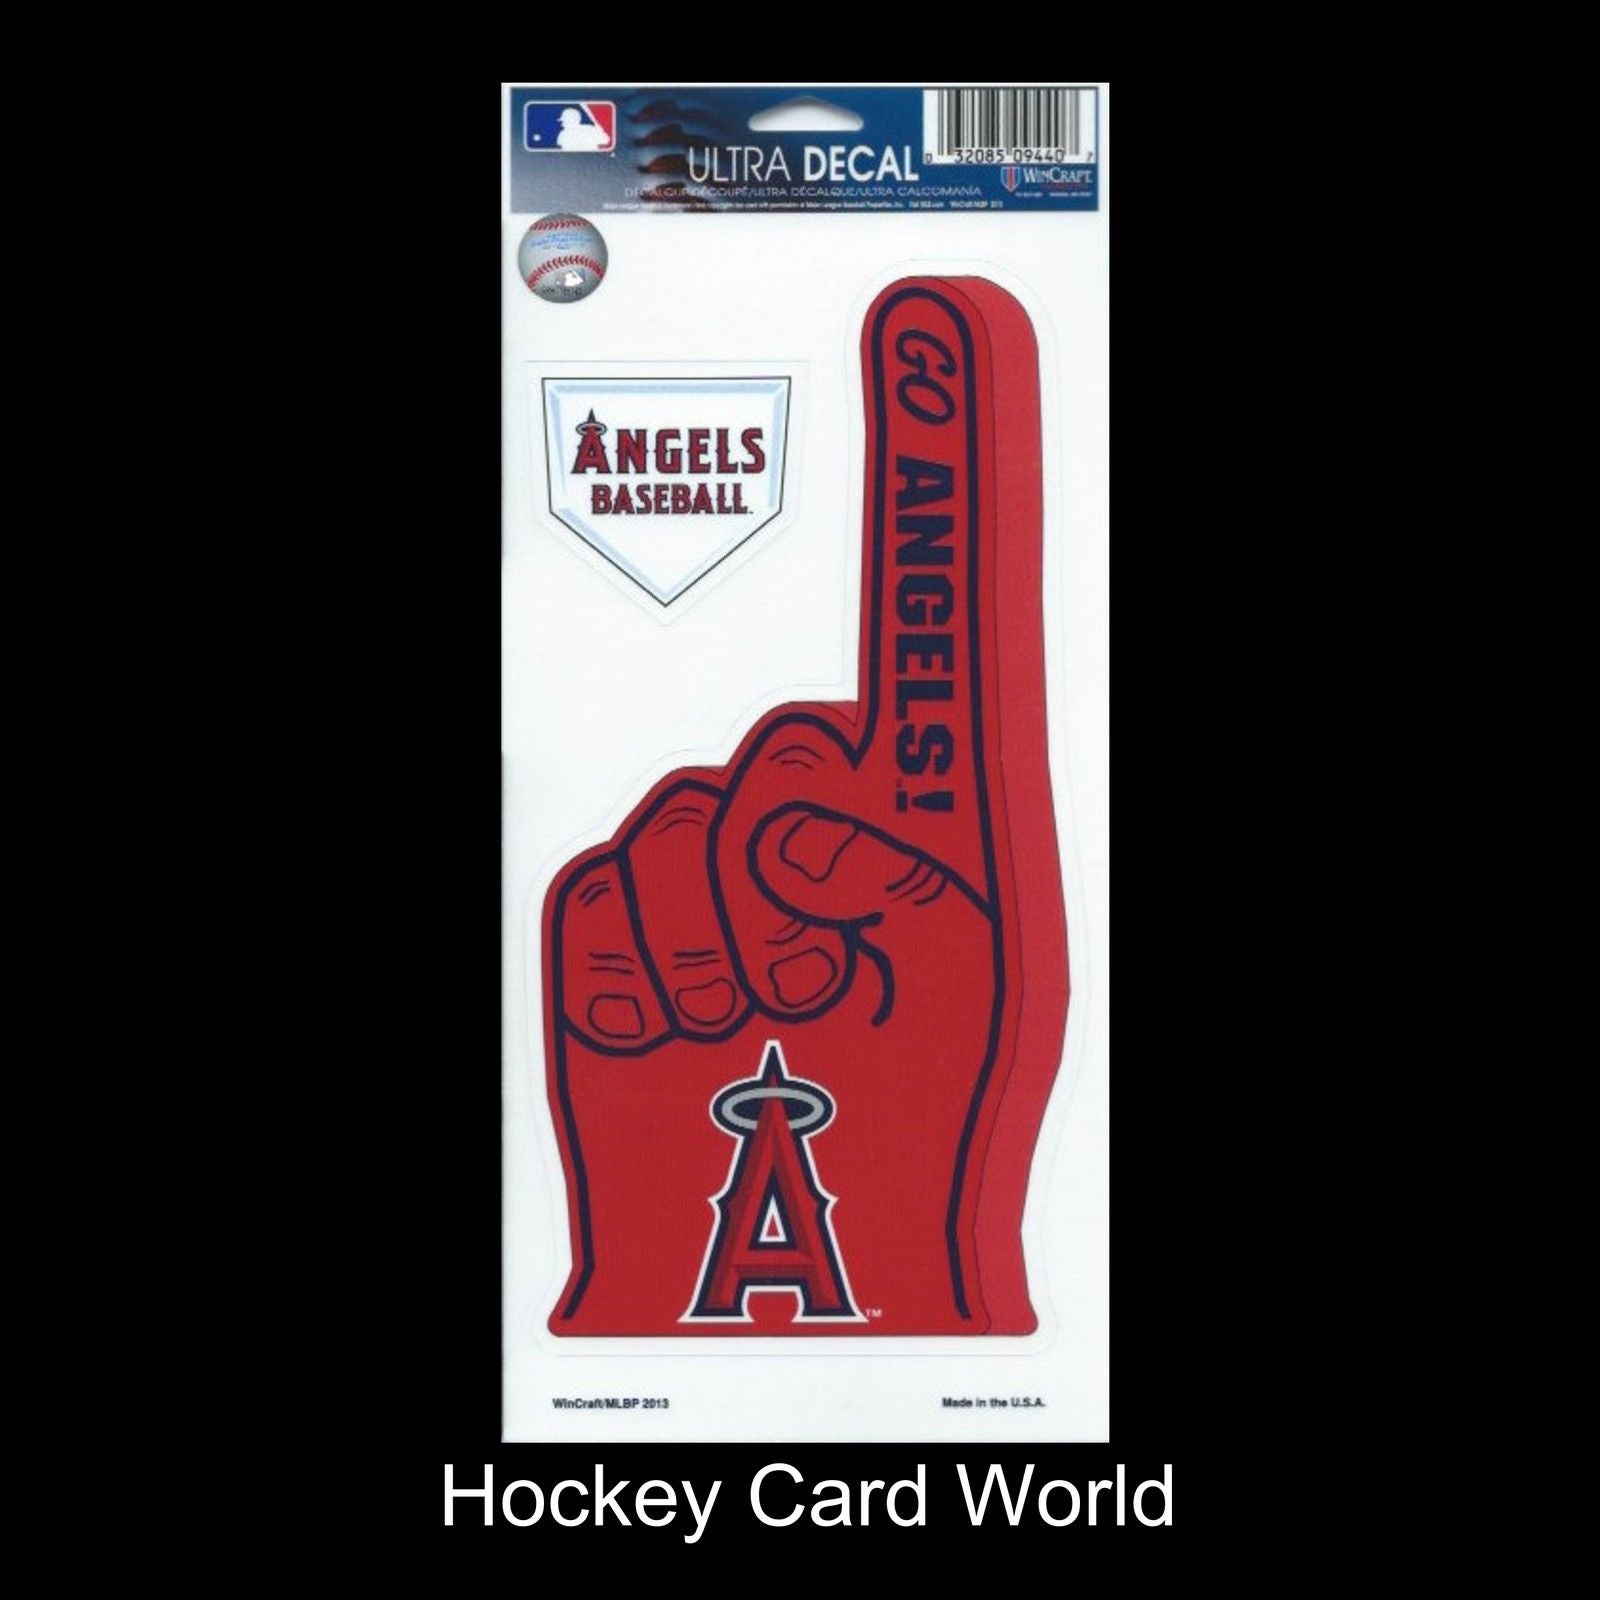  Los Angeles Angels Multi-Use Decal/Sticker 2 Pack Finger/Base MLB 4"x 9" Image 1